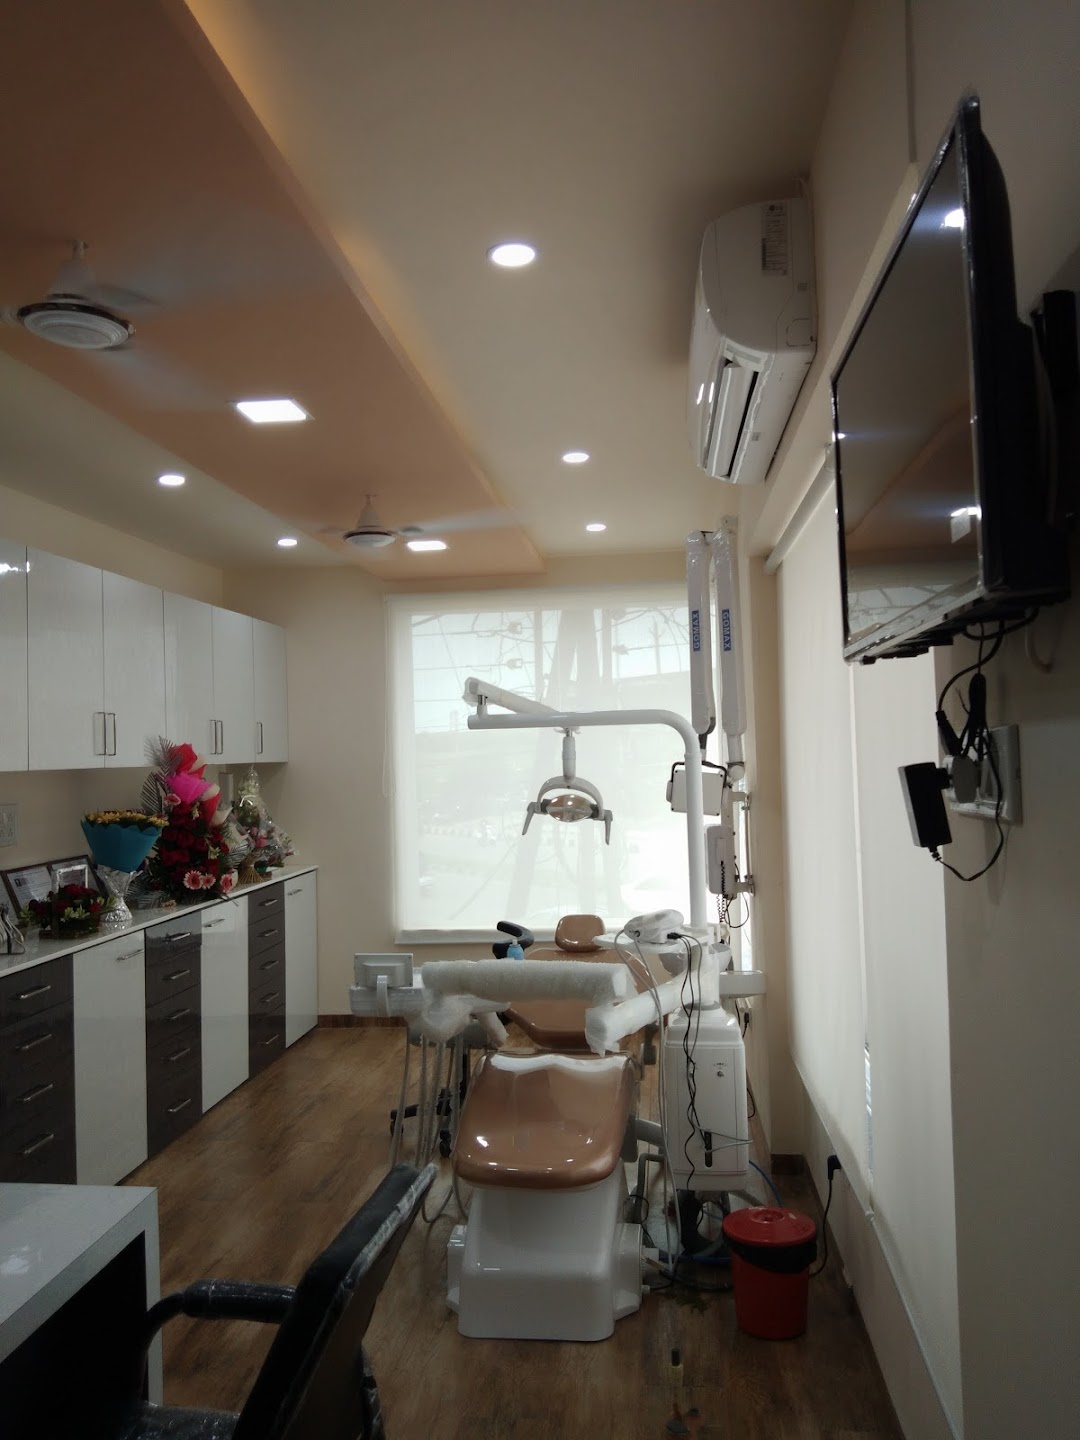 Expressions Dental Care and Orthodontic Center